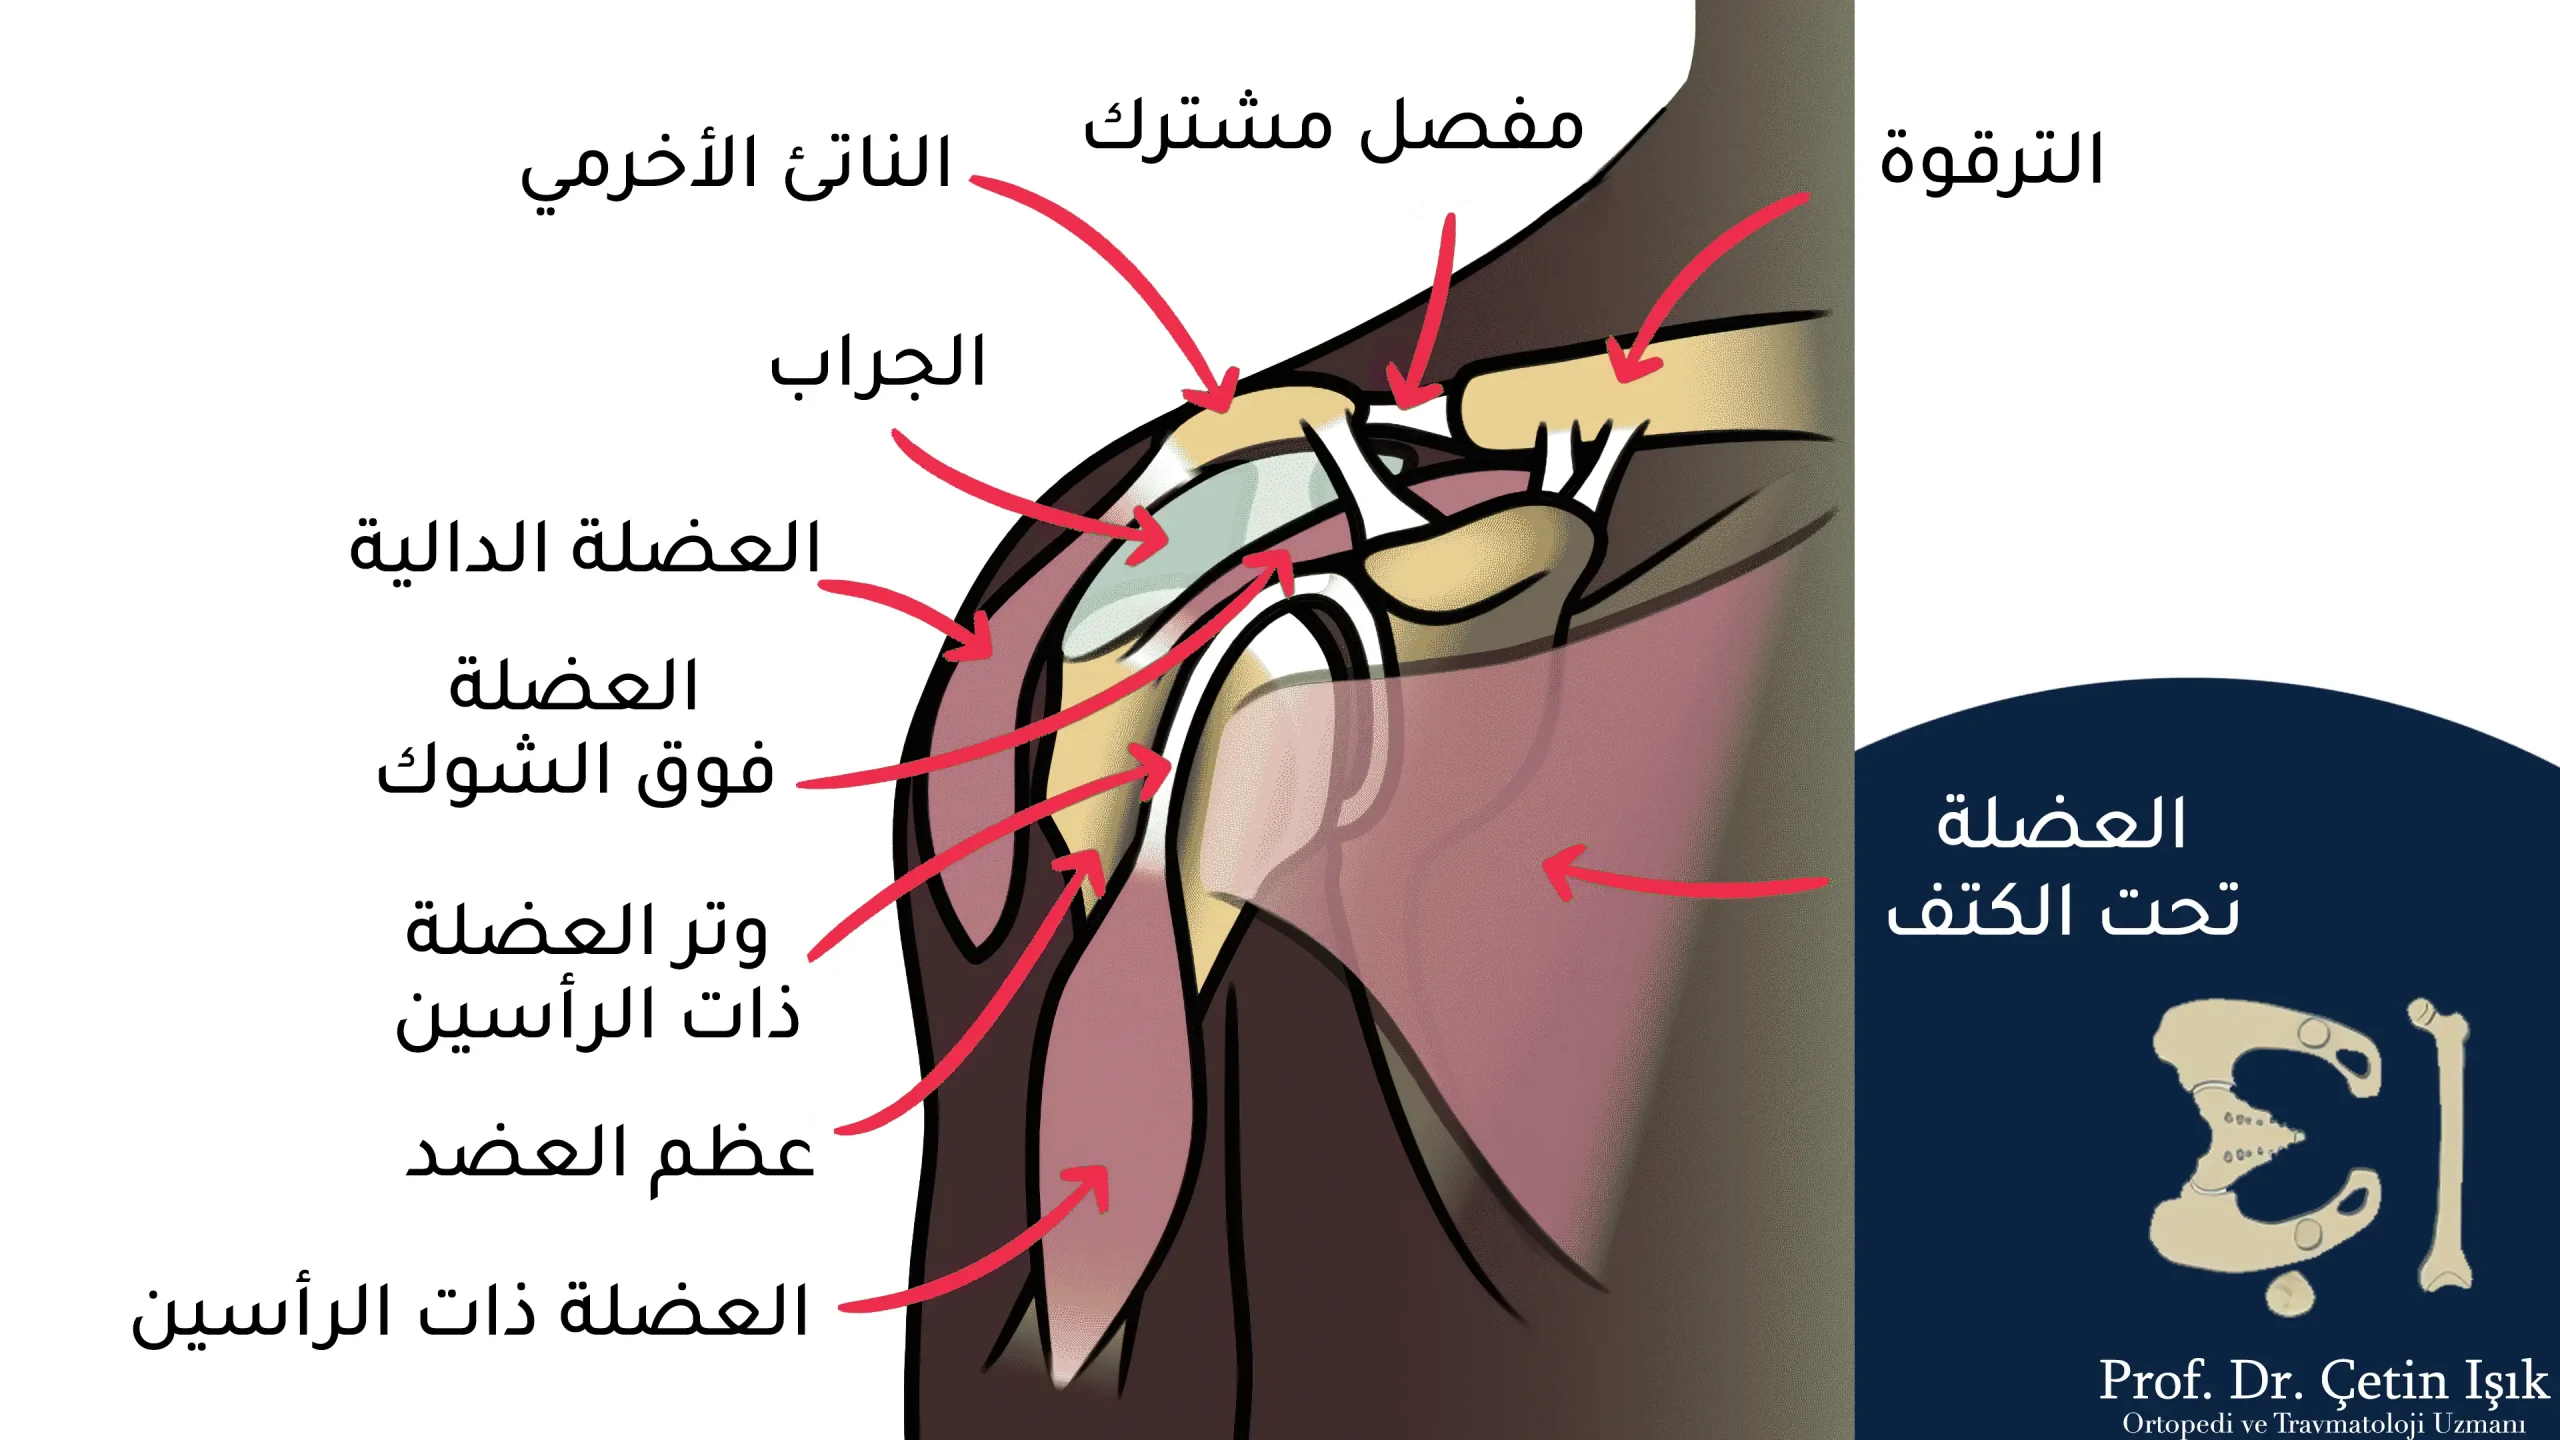 We notice from the picture the muscles and tendons in the shoulder joint and how the biceps tendon is positioned